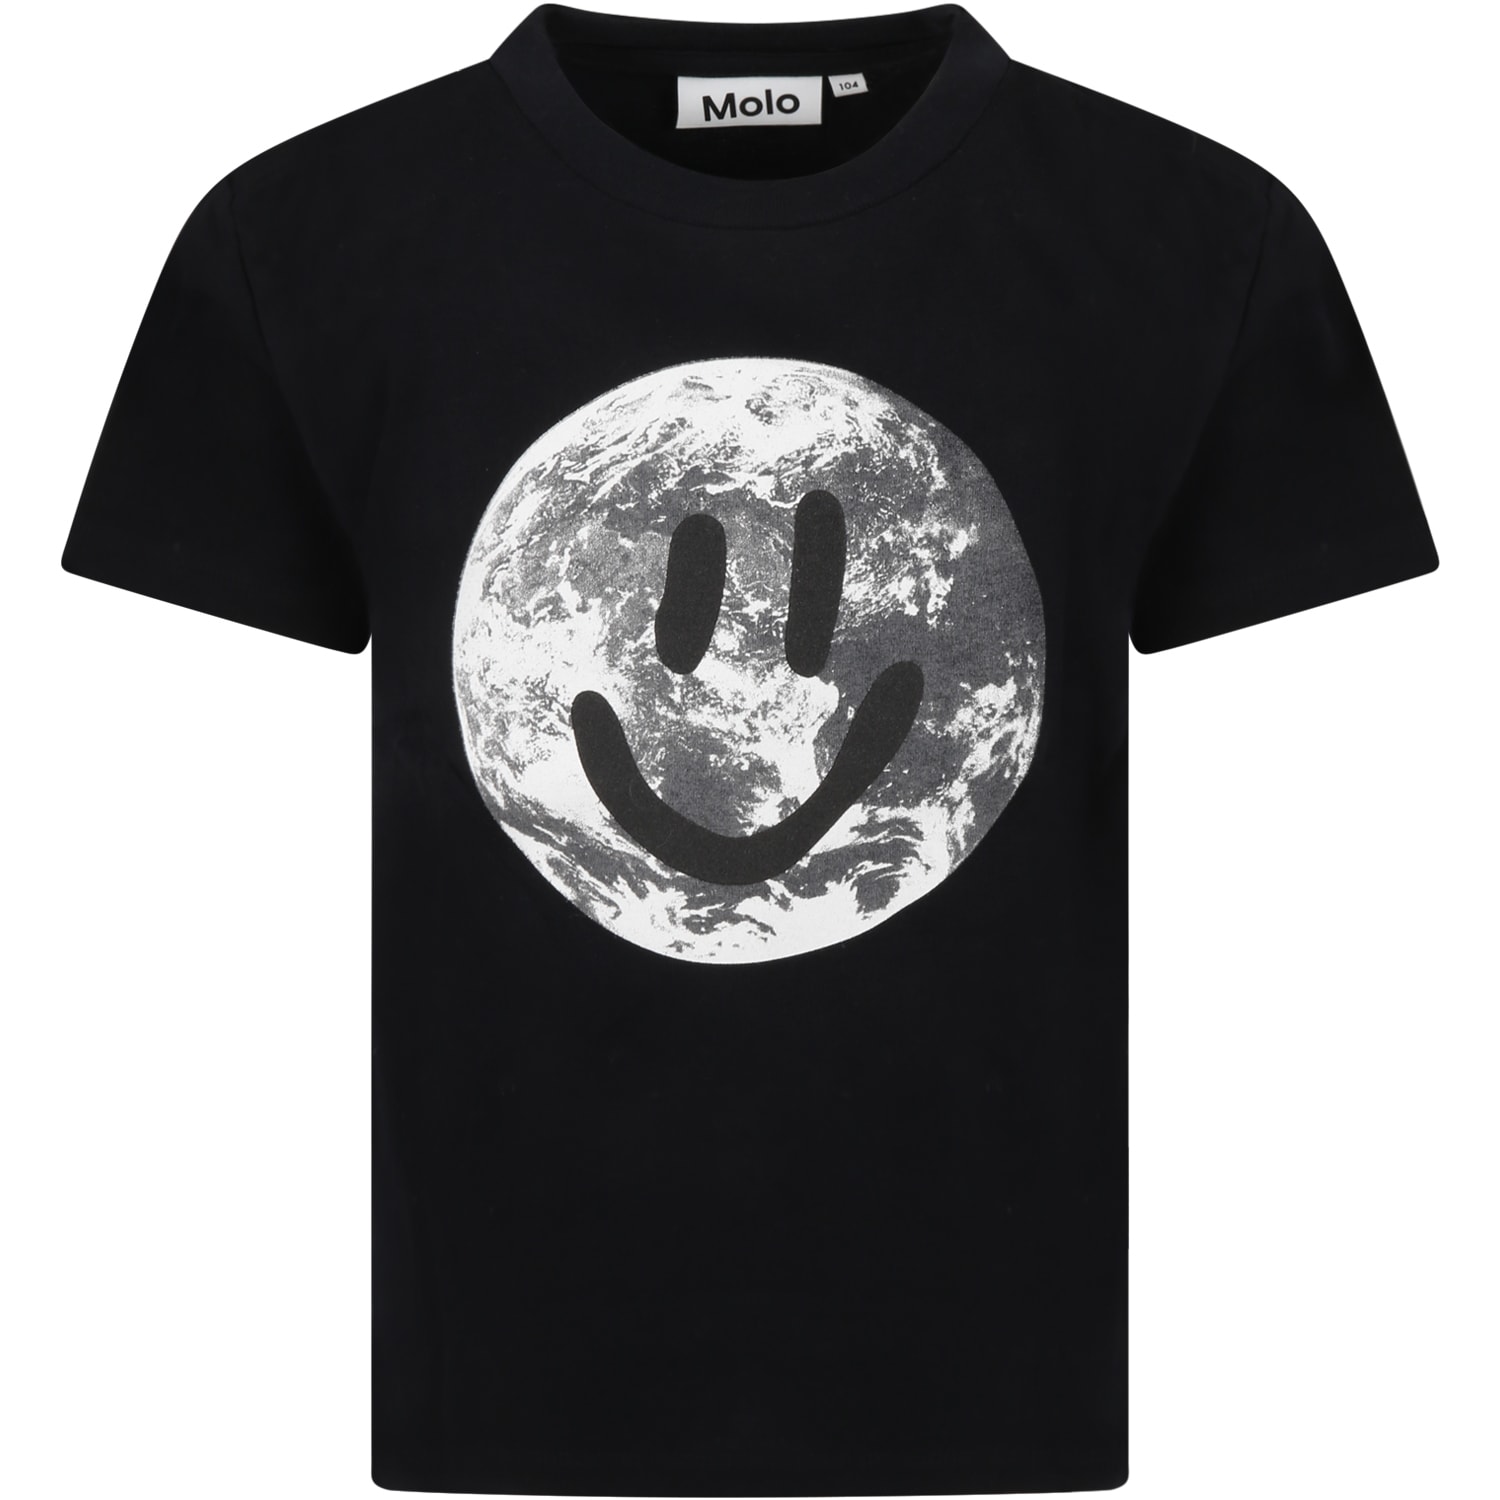 Molo Black T-shirt For Kids With Moon